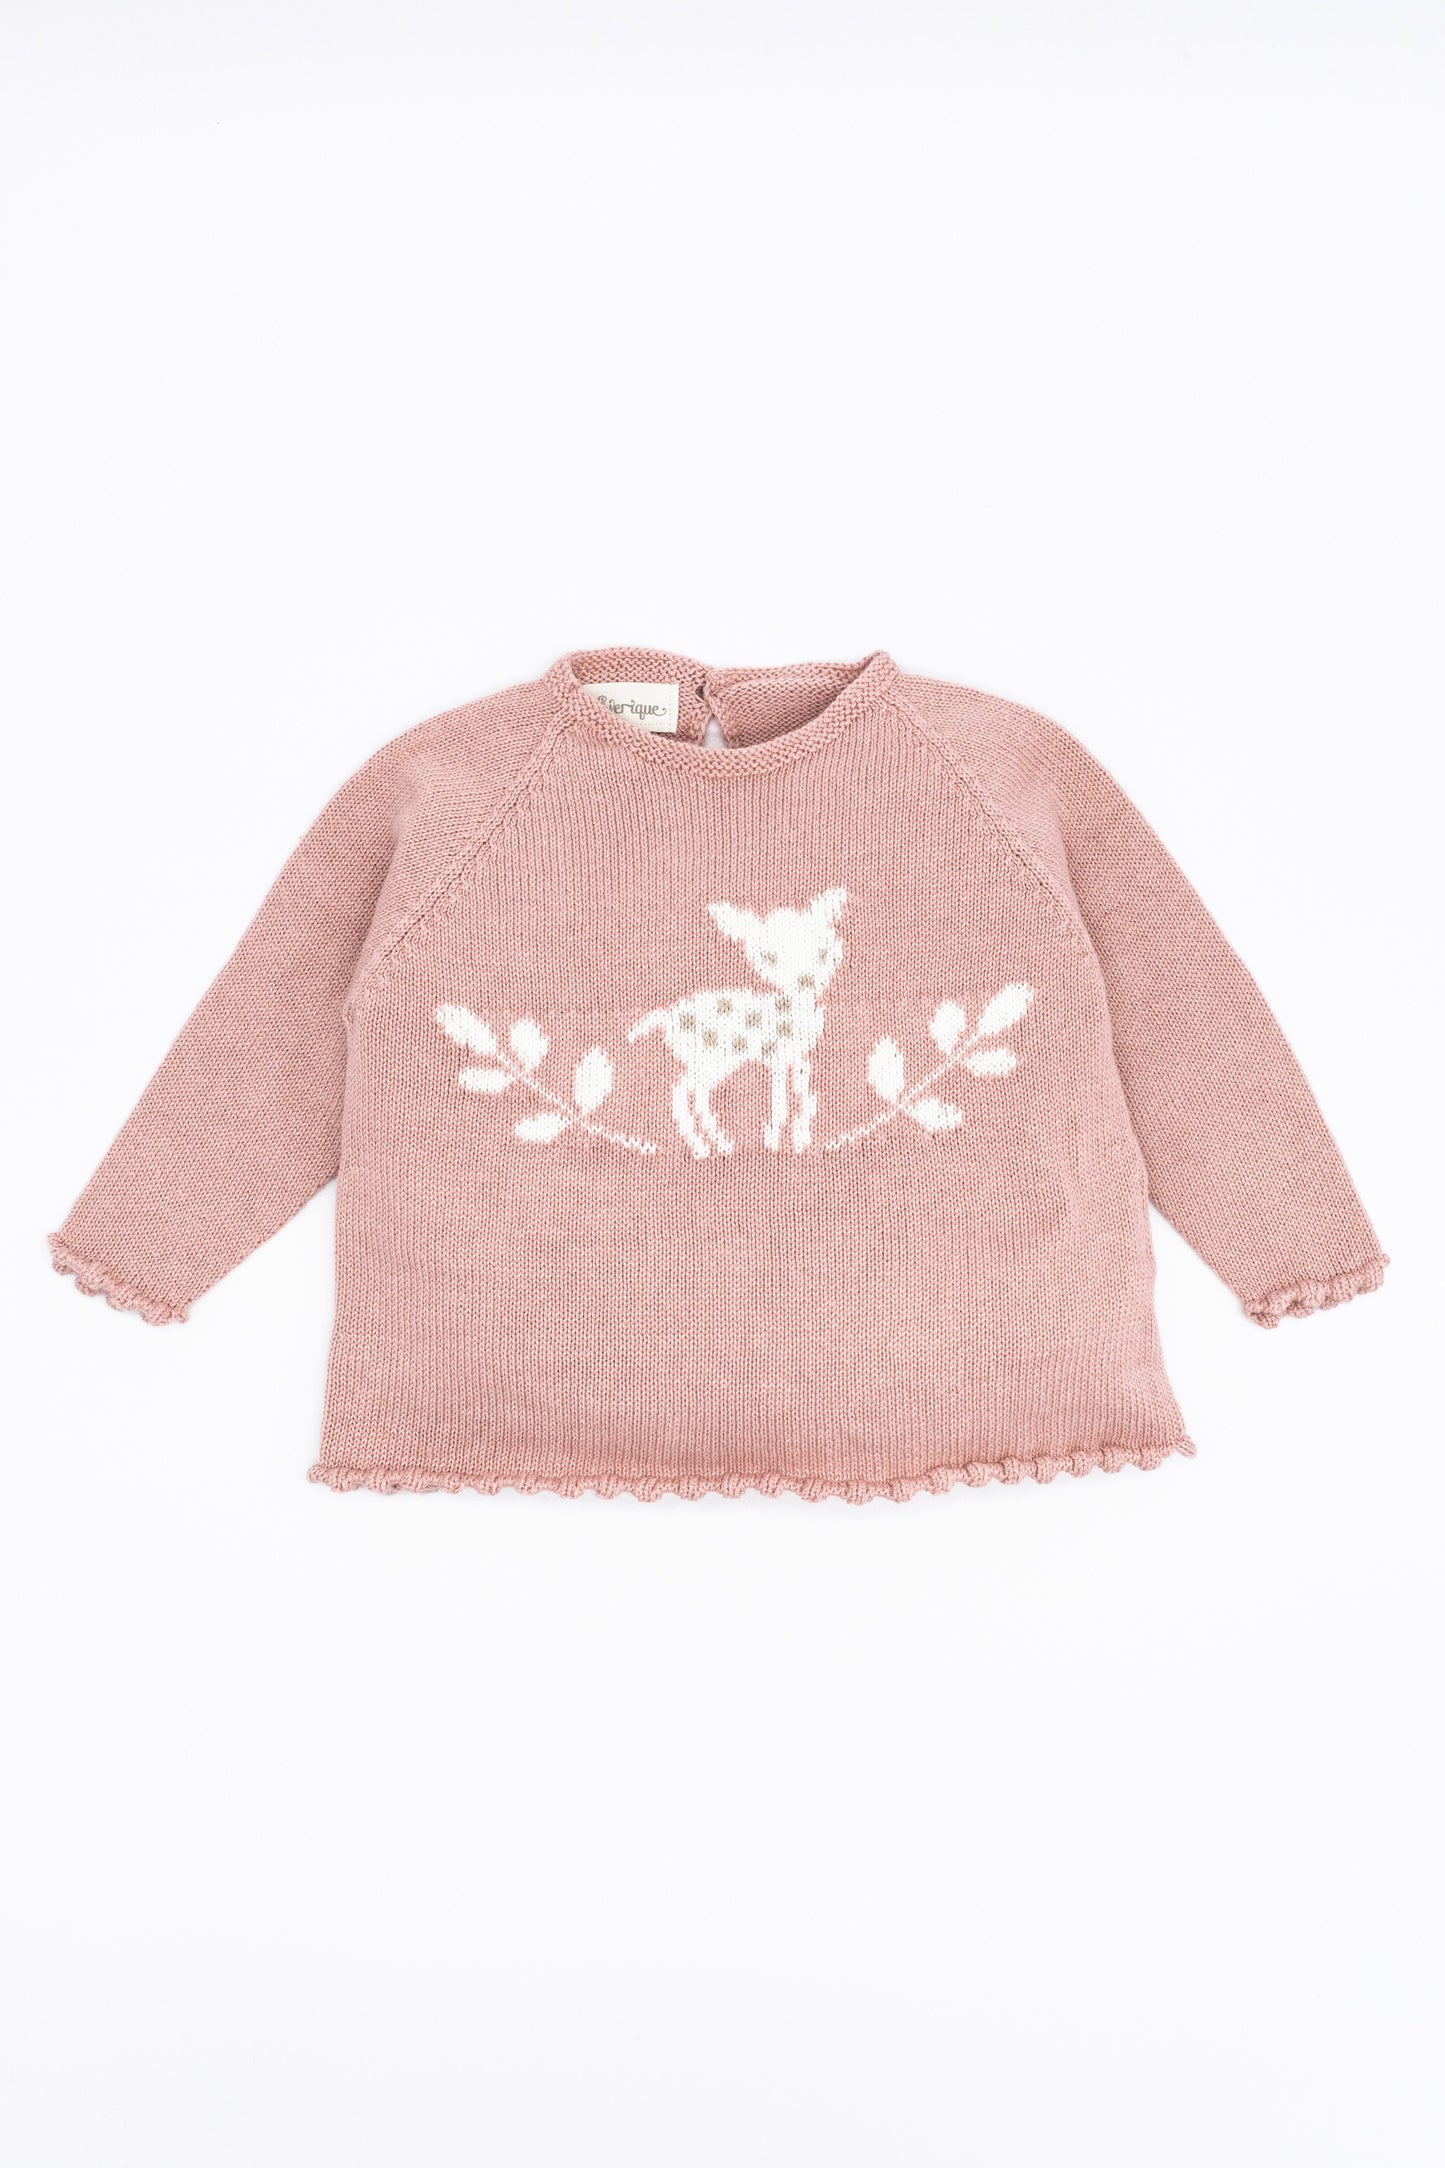 Pink knitted sweater made of merino wool